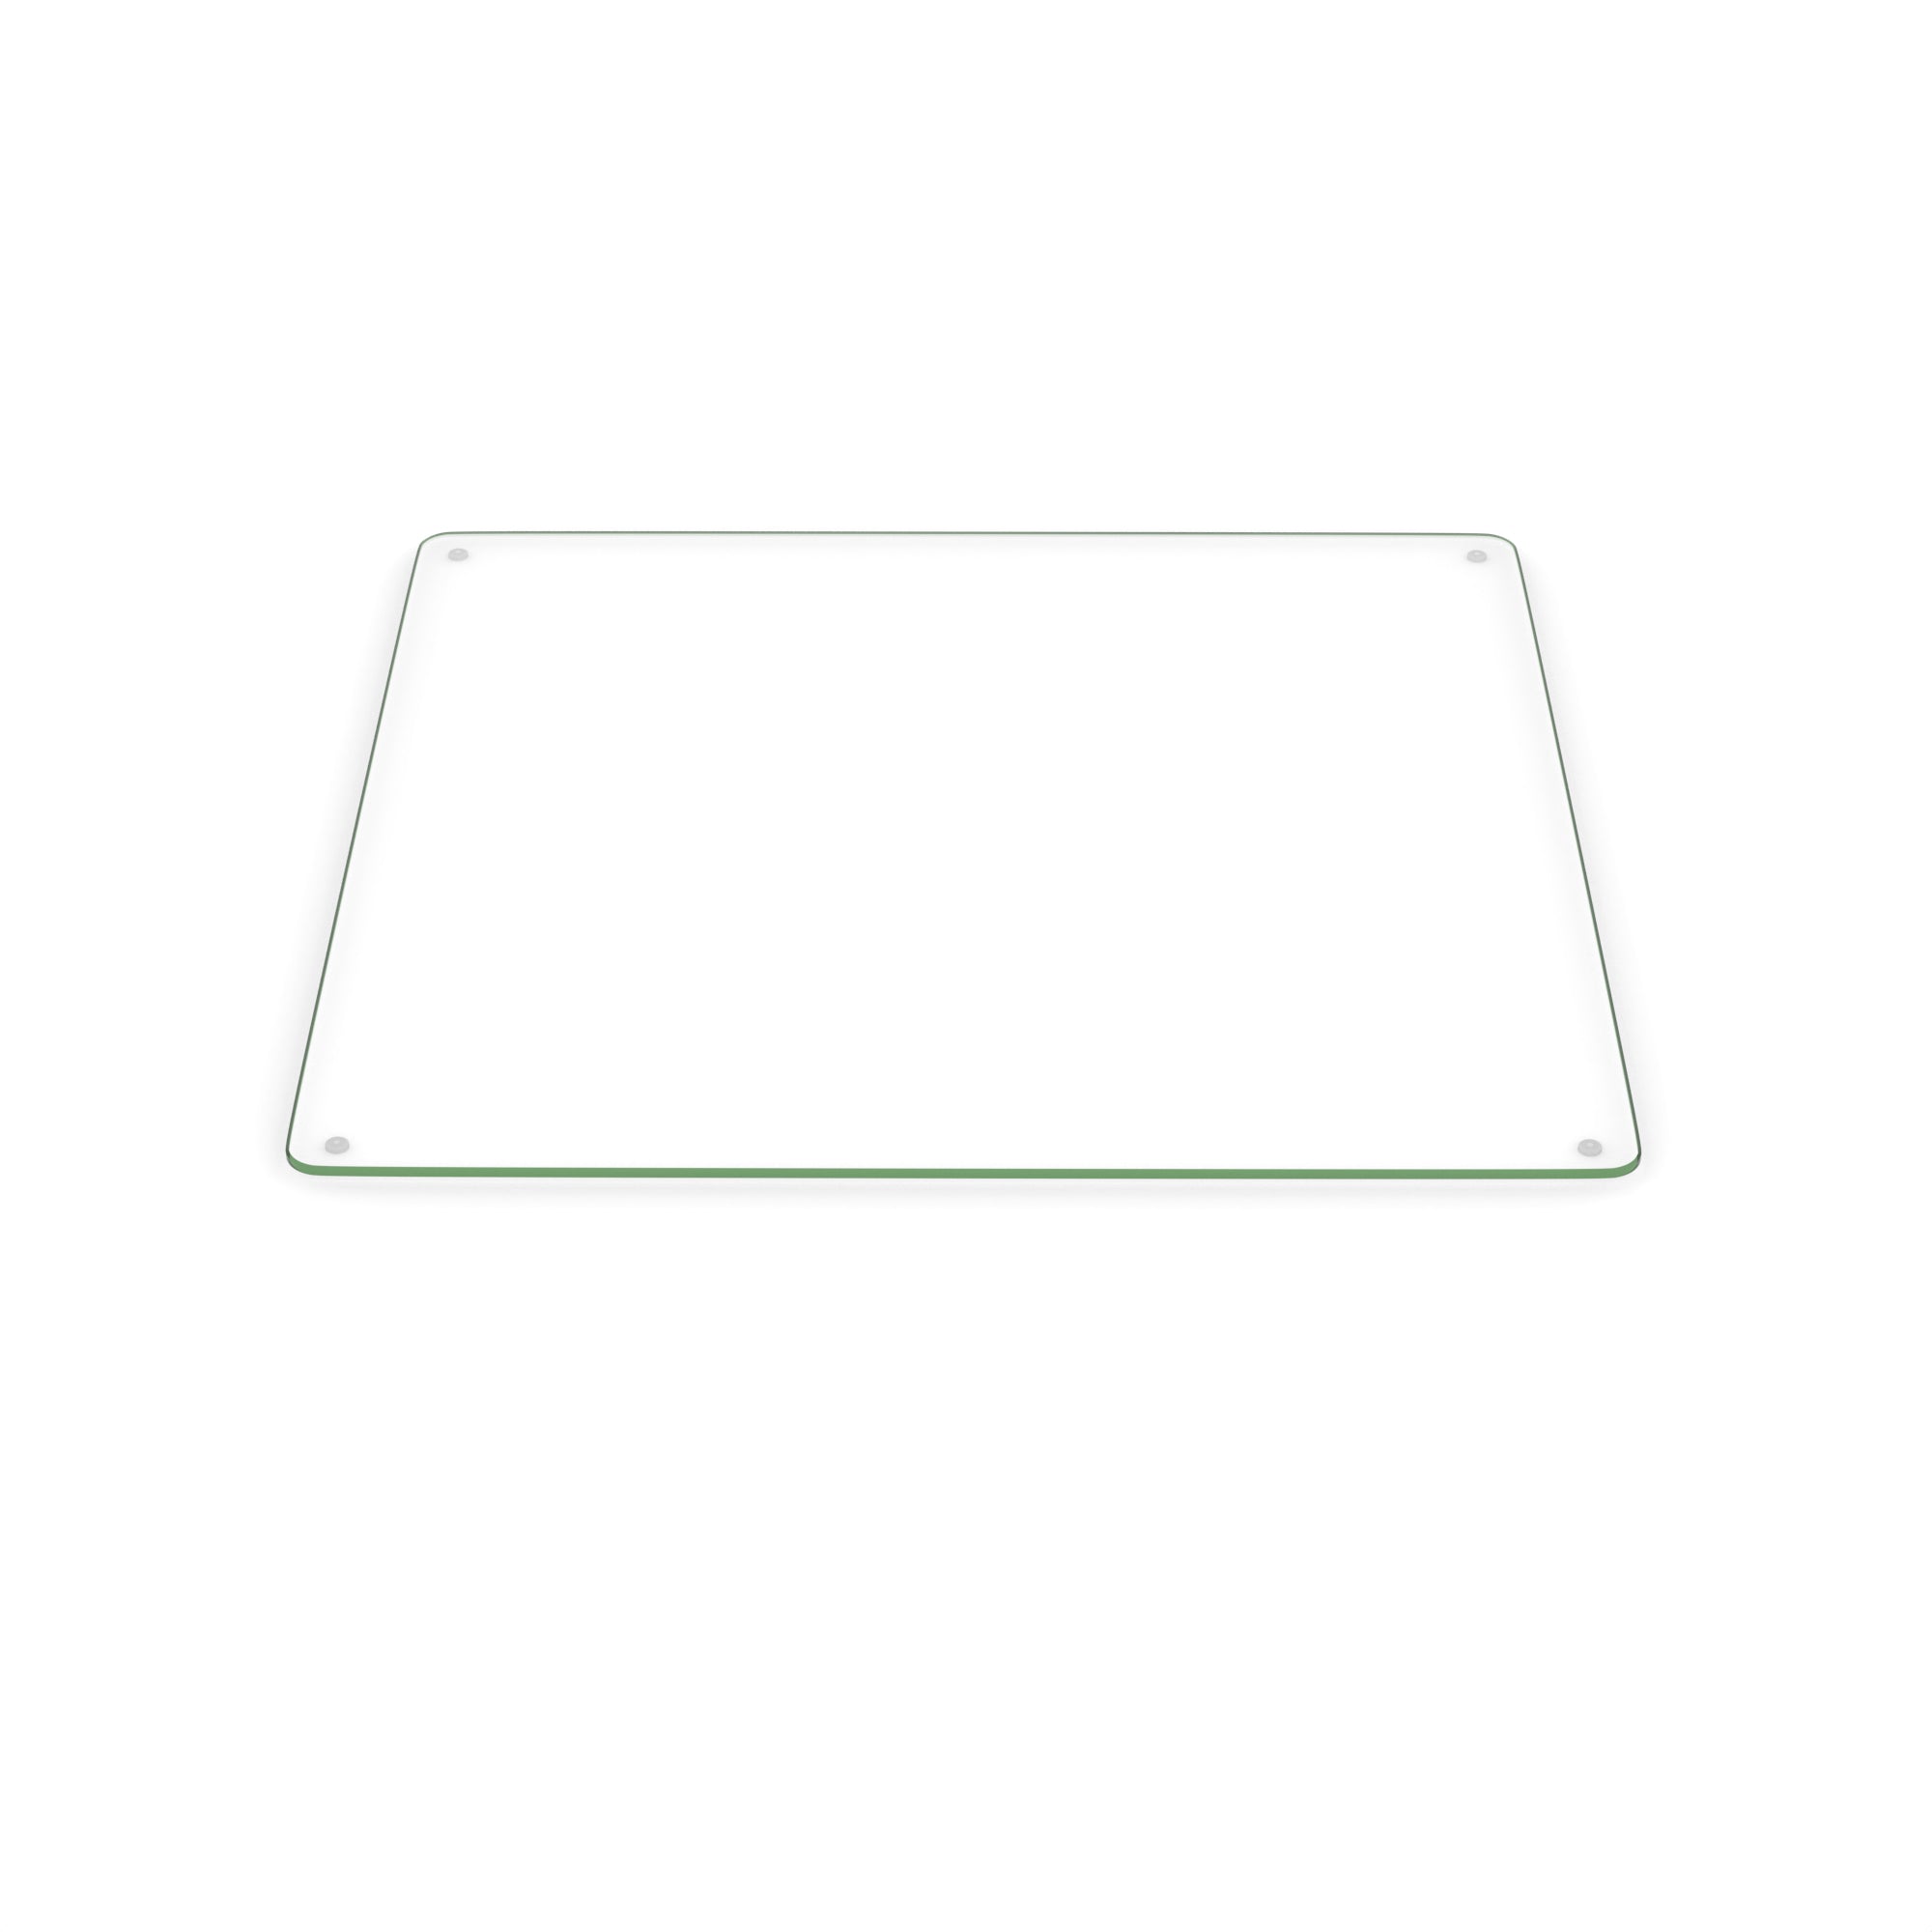 5mm Square Glass Chair Mat